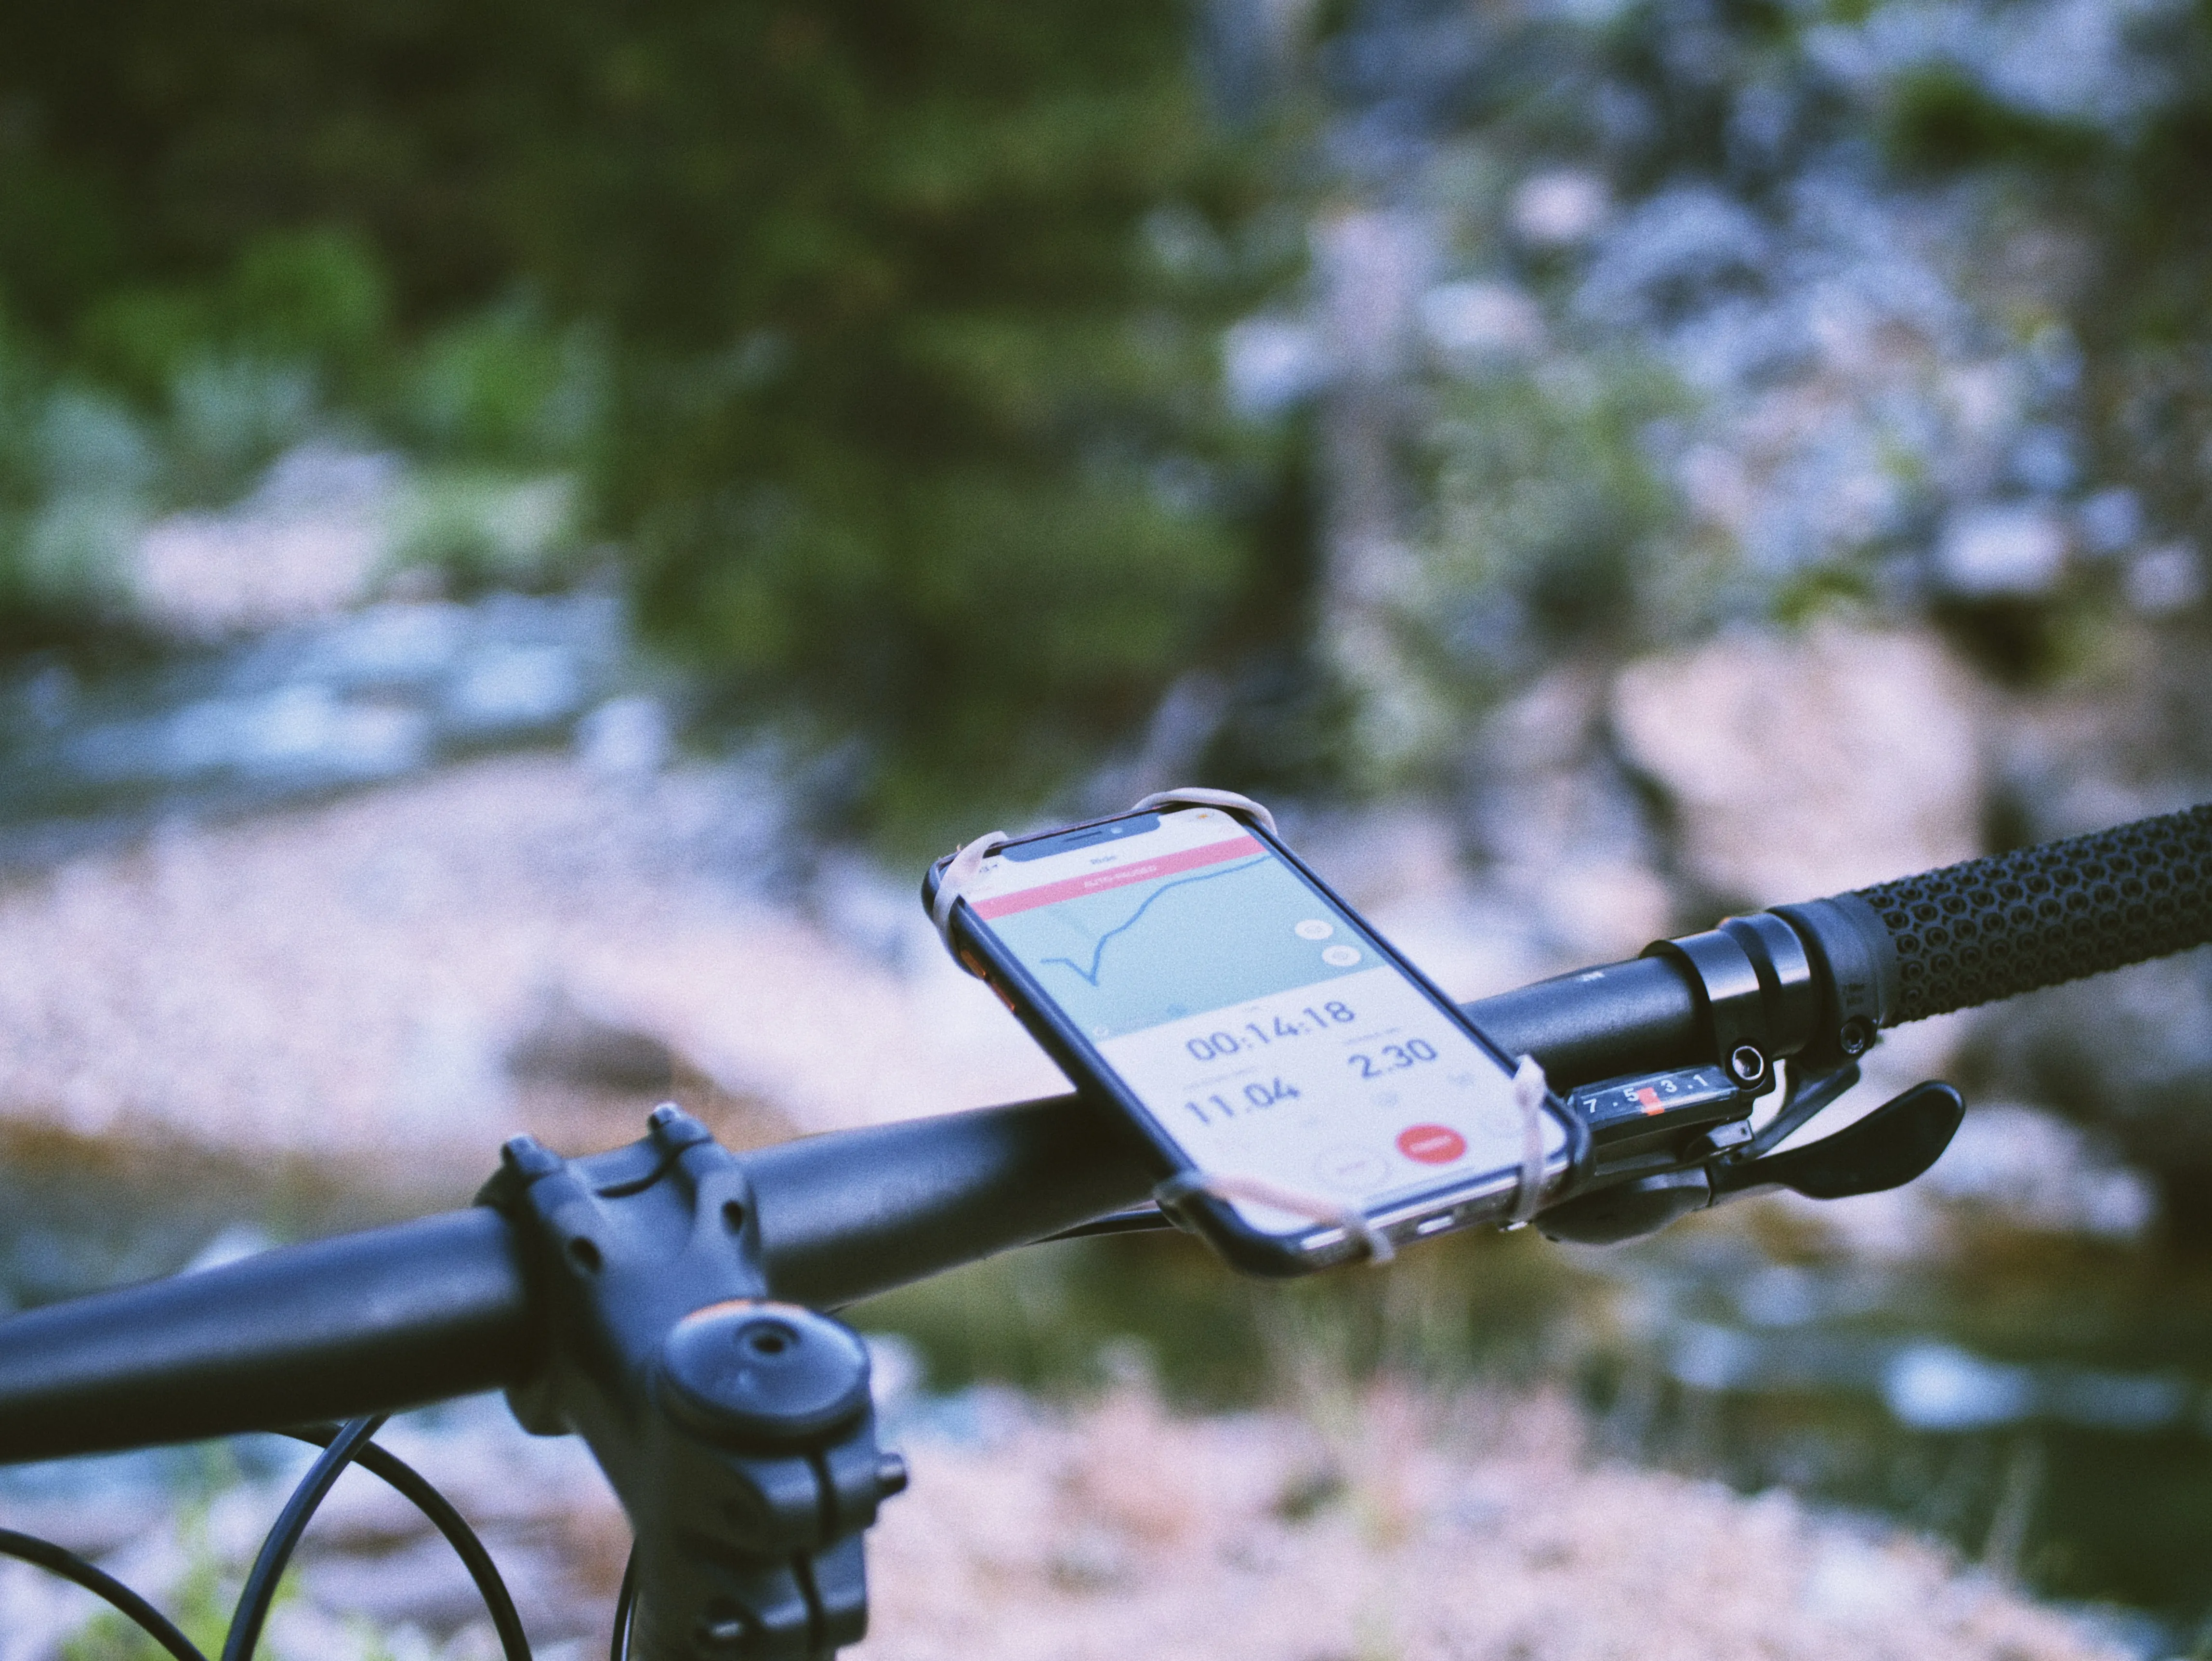 Biker riding with Strava active on phone attached to steering wheel